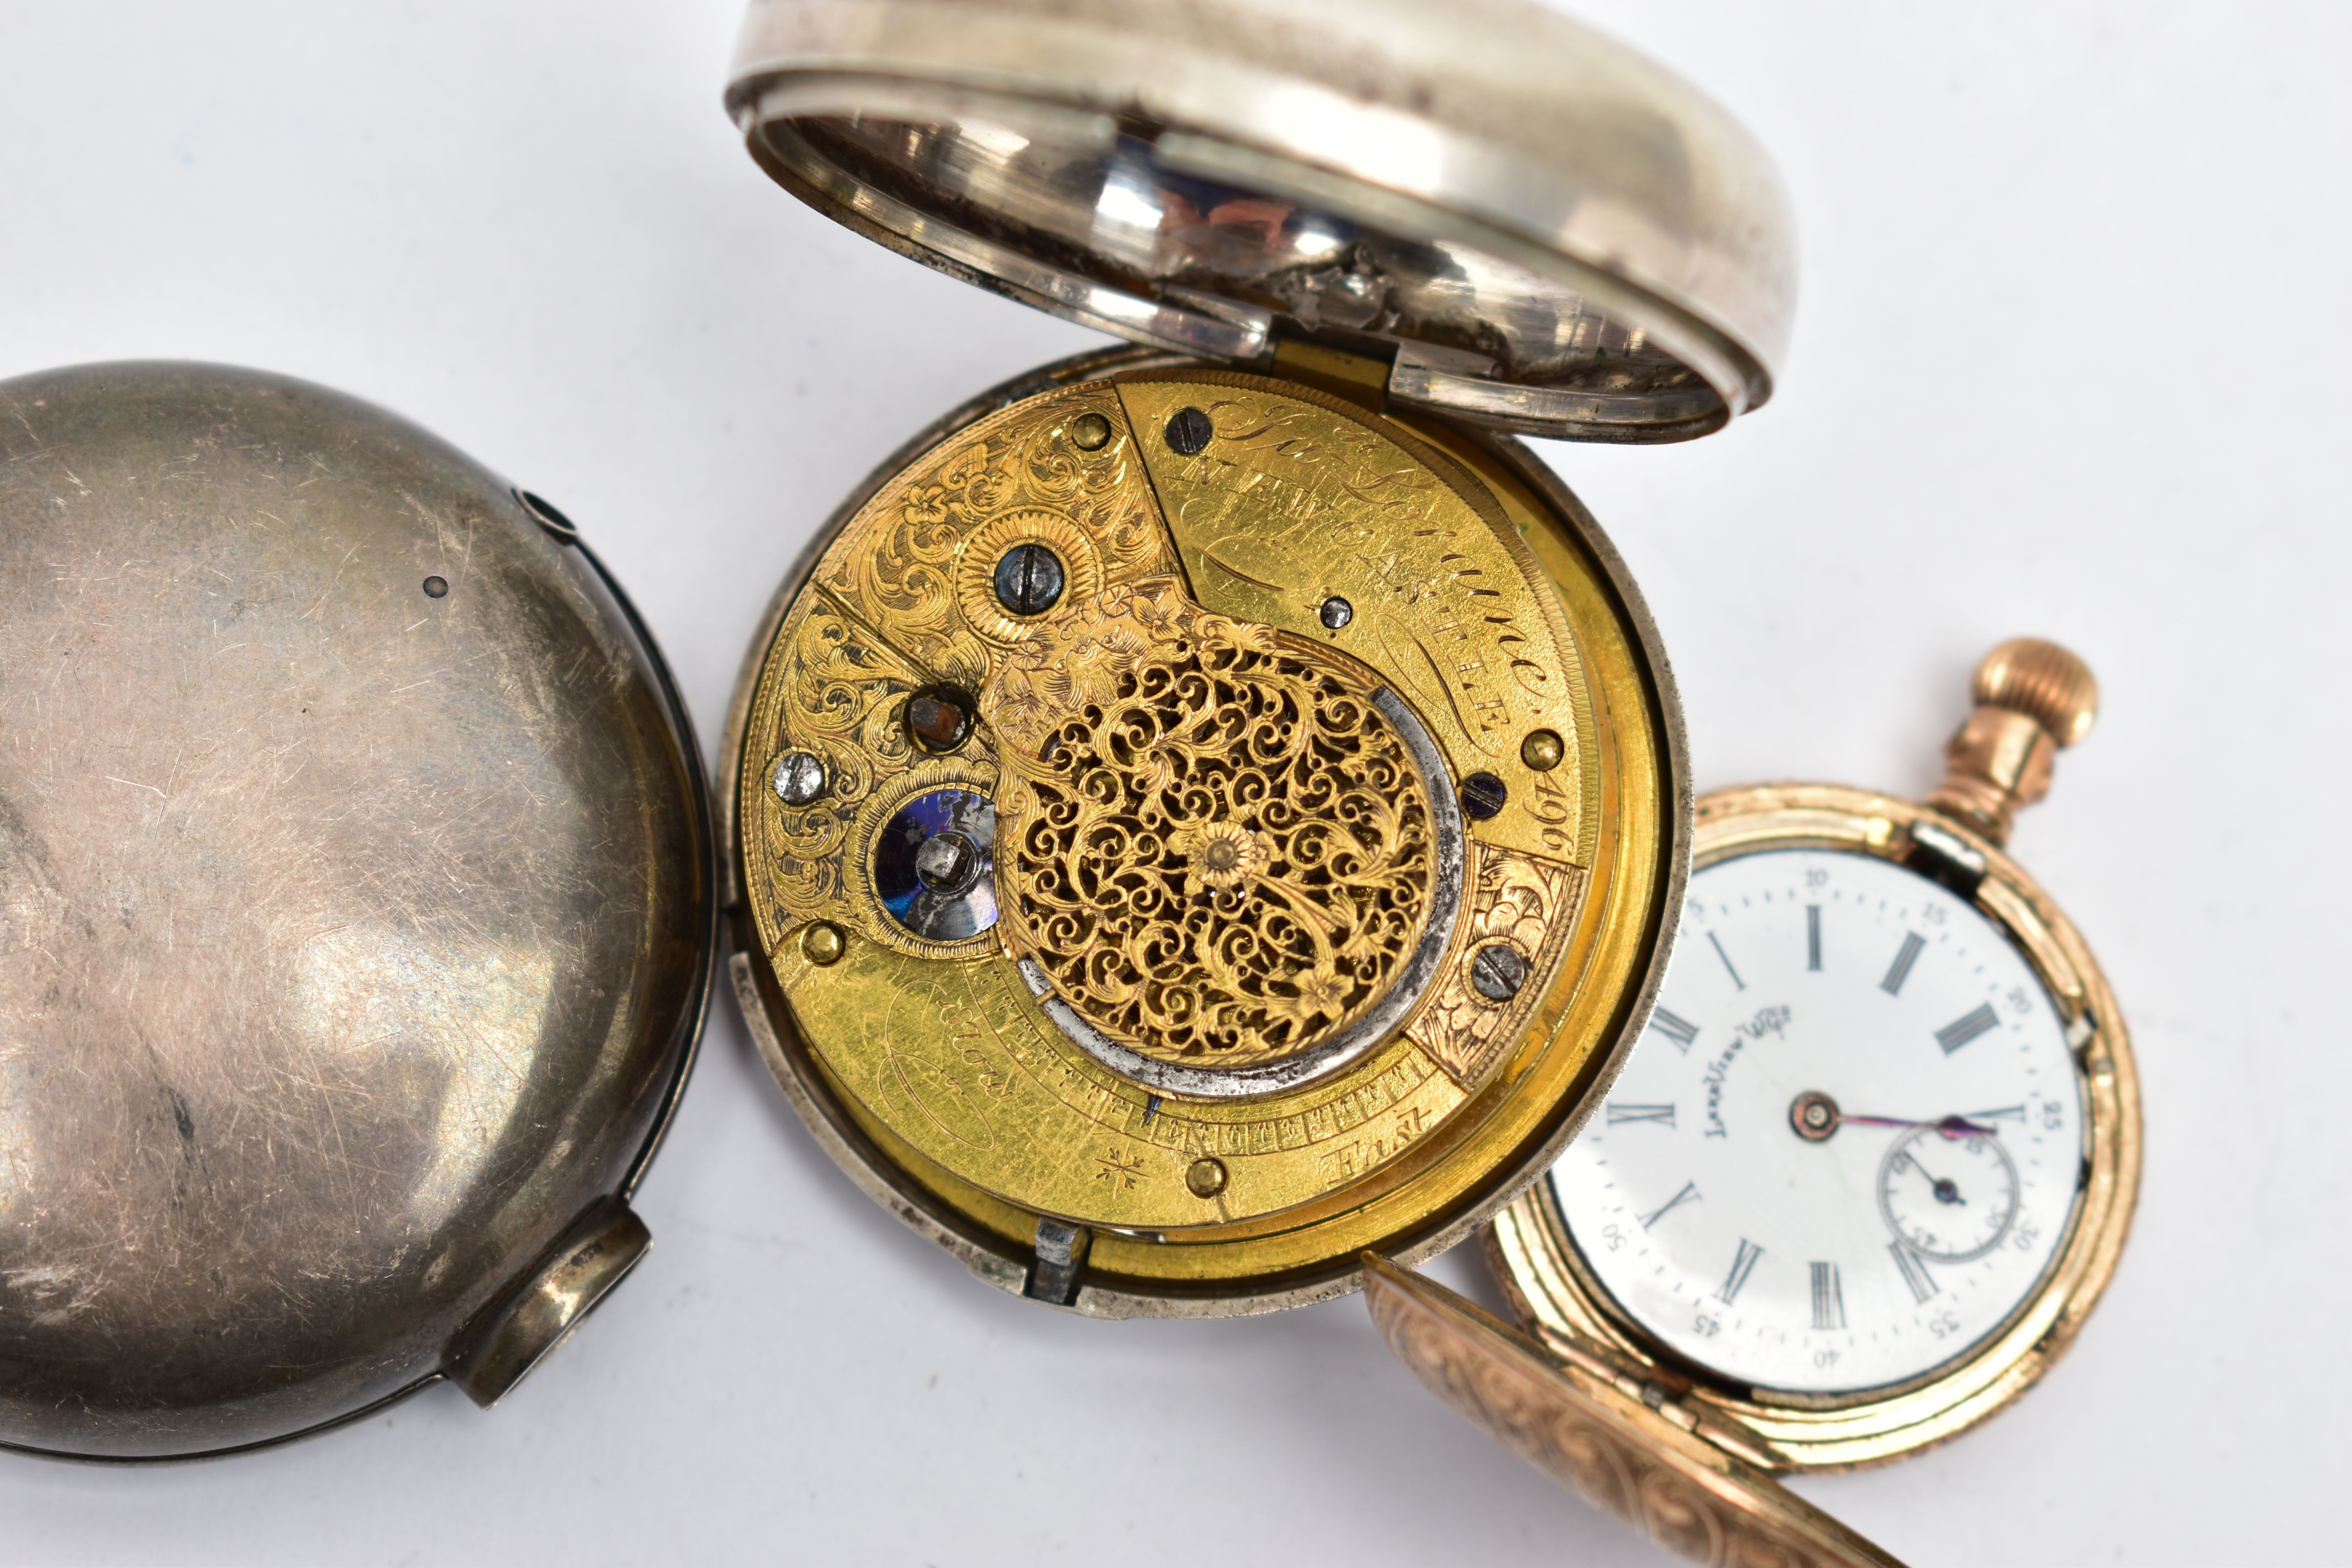 TWO POCKET WATCHES, the first a George IV open face key wound pocket watch, Roman numerals, - Image 5 of 5